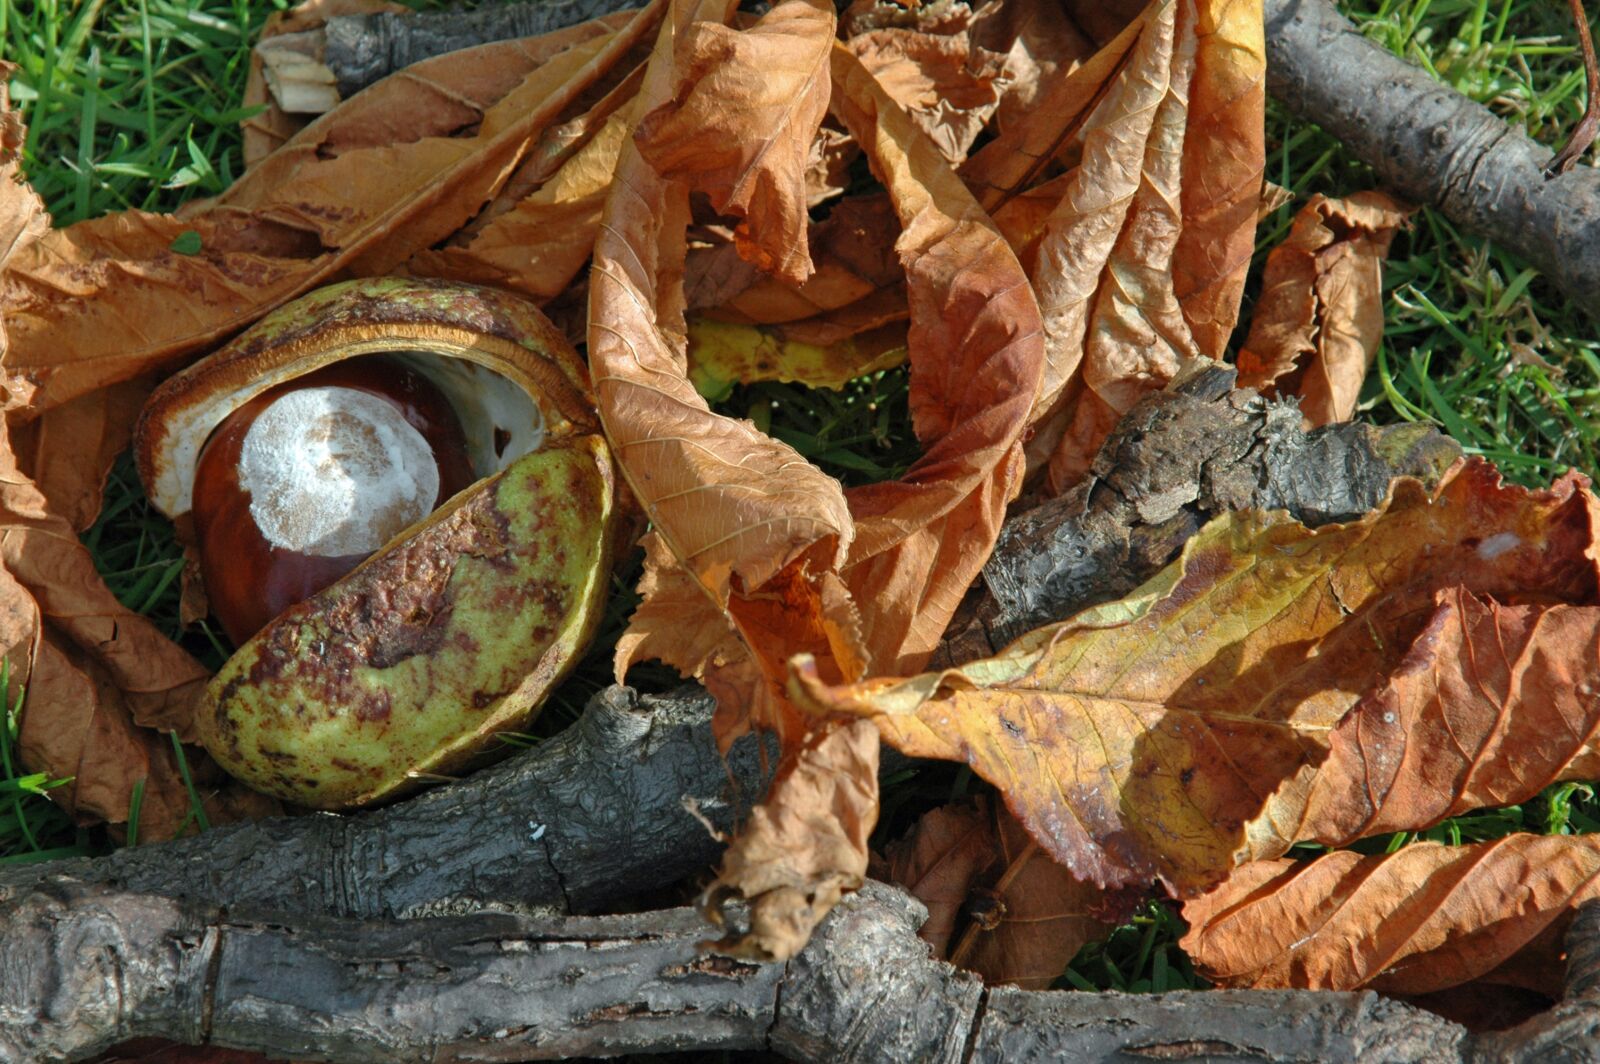 Nikon D70 sample photo. Conkers, horse chestnut, wood photography